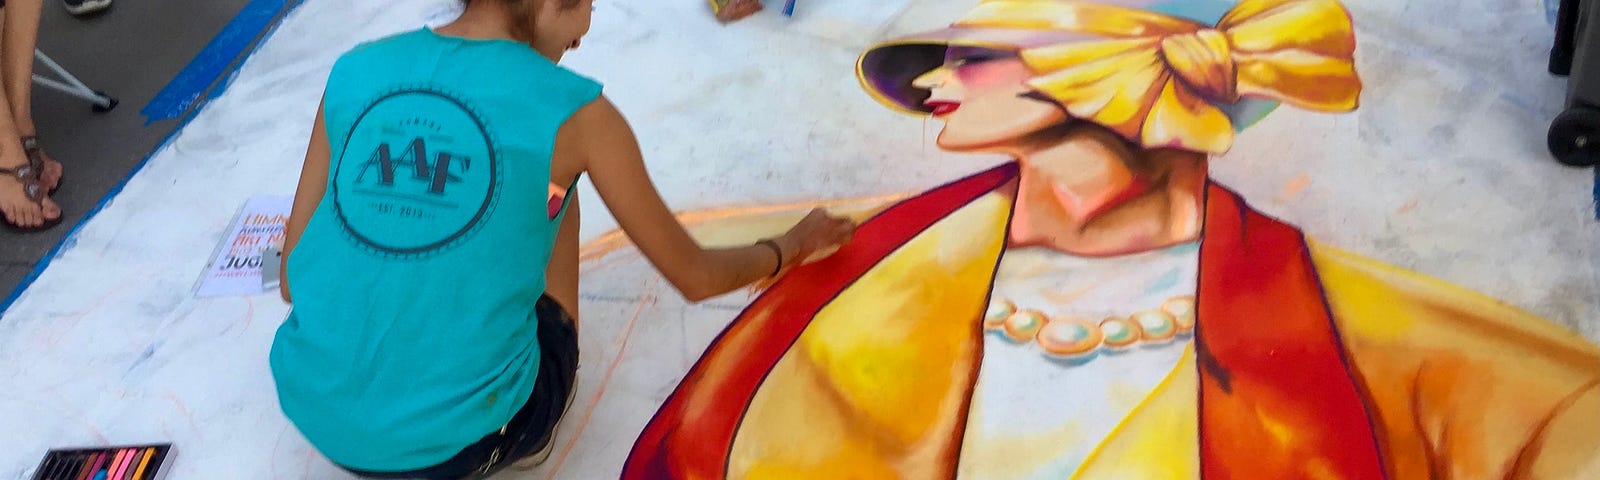 A young dark-haired woman squats down to do more work on a chalk drawing of a 1920s woman in a yellow and red outfit.